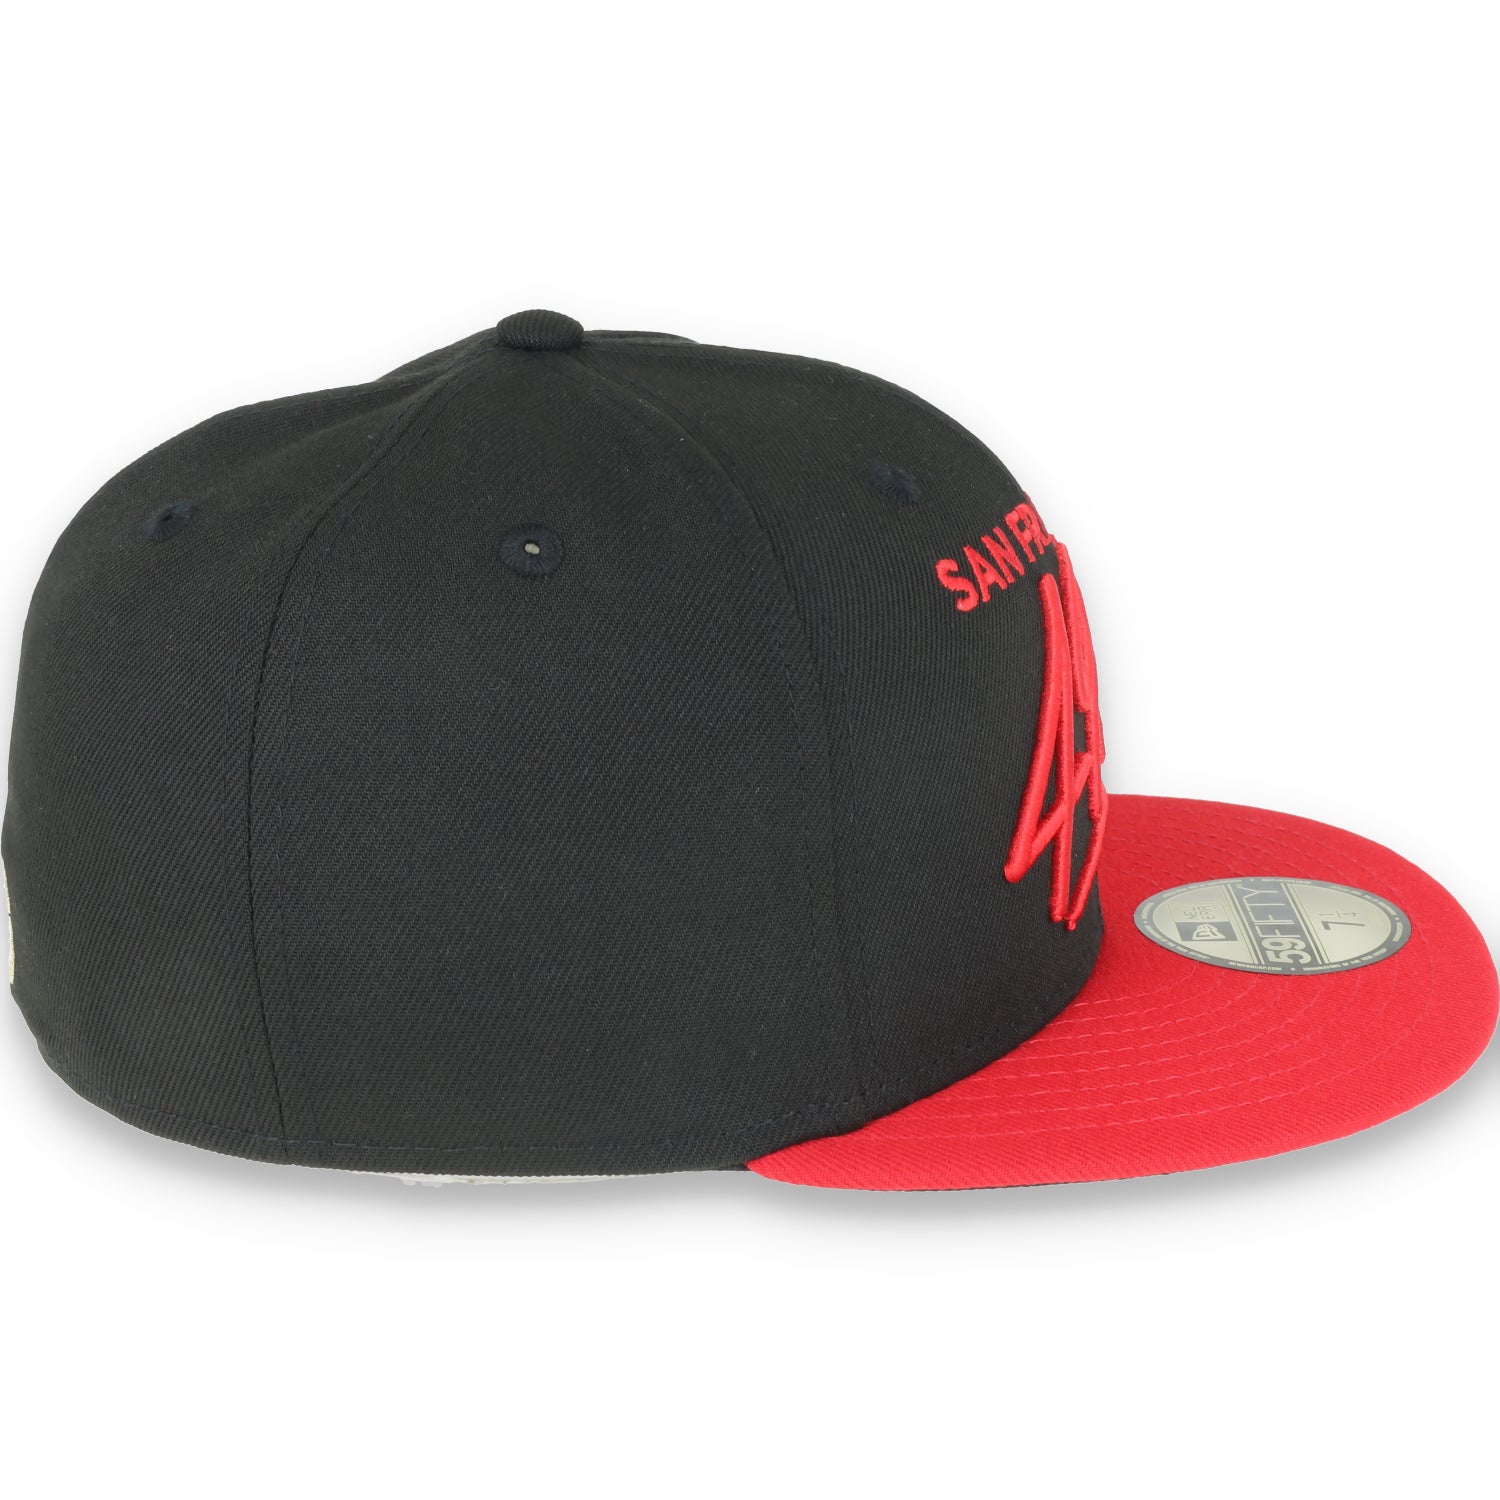 Exclusive San Francisco 49ers  Official 59FIFTY Fitted -BLACK/SCARLET